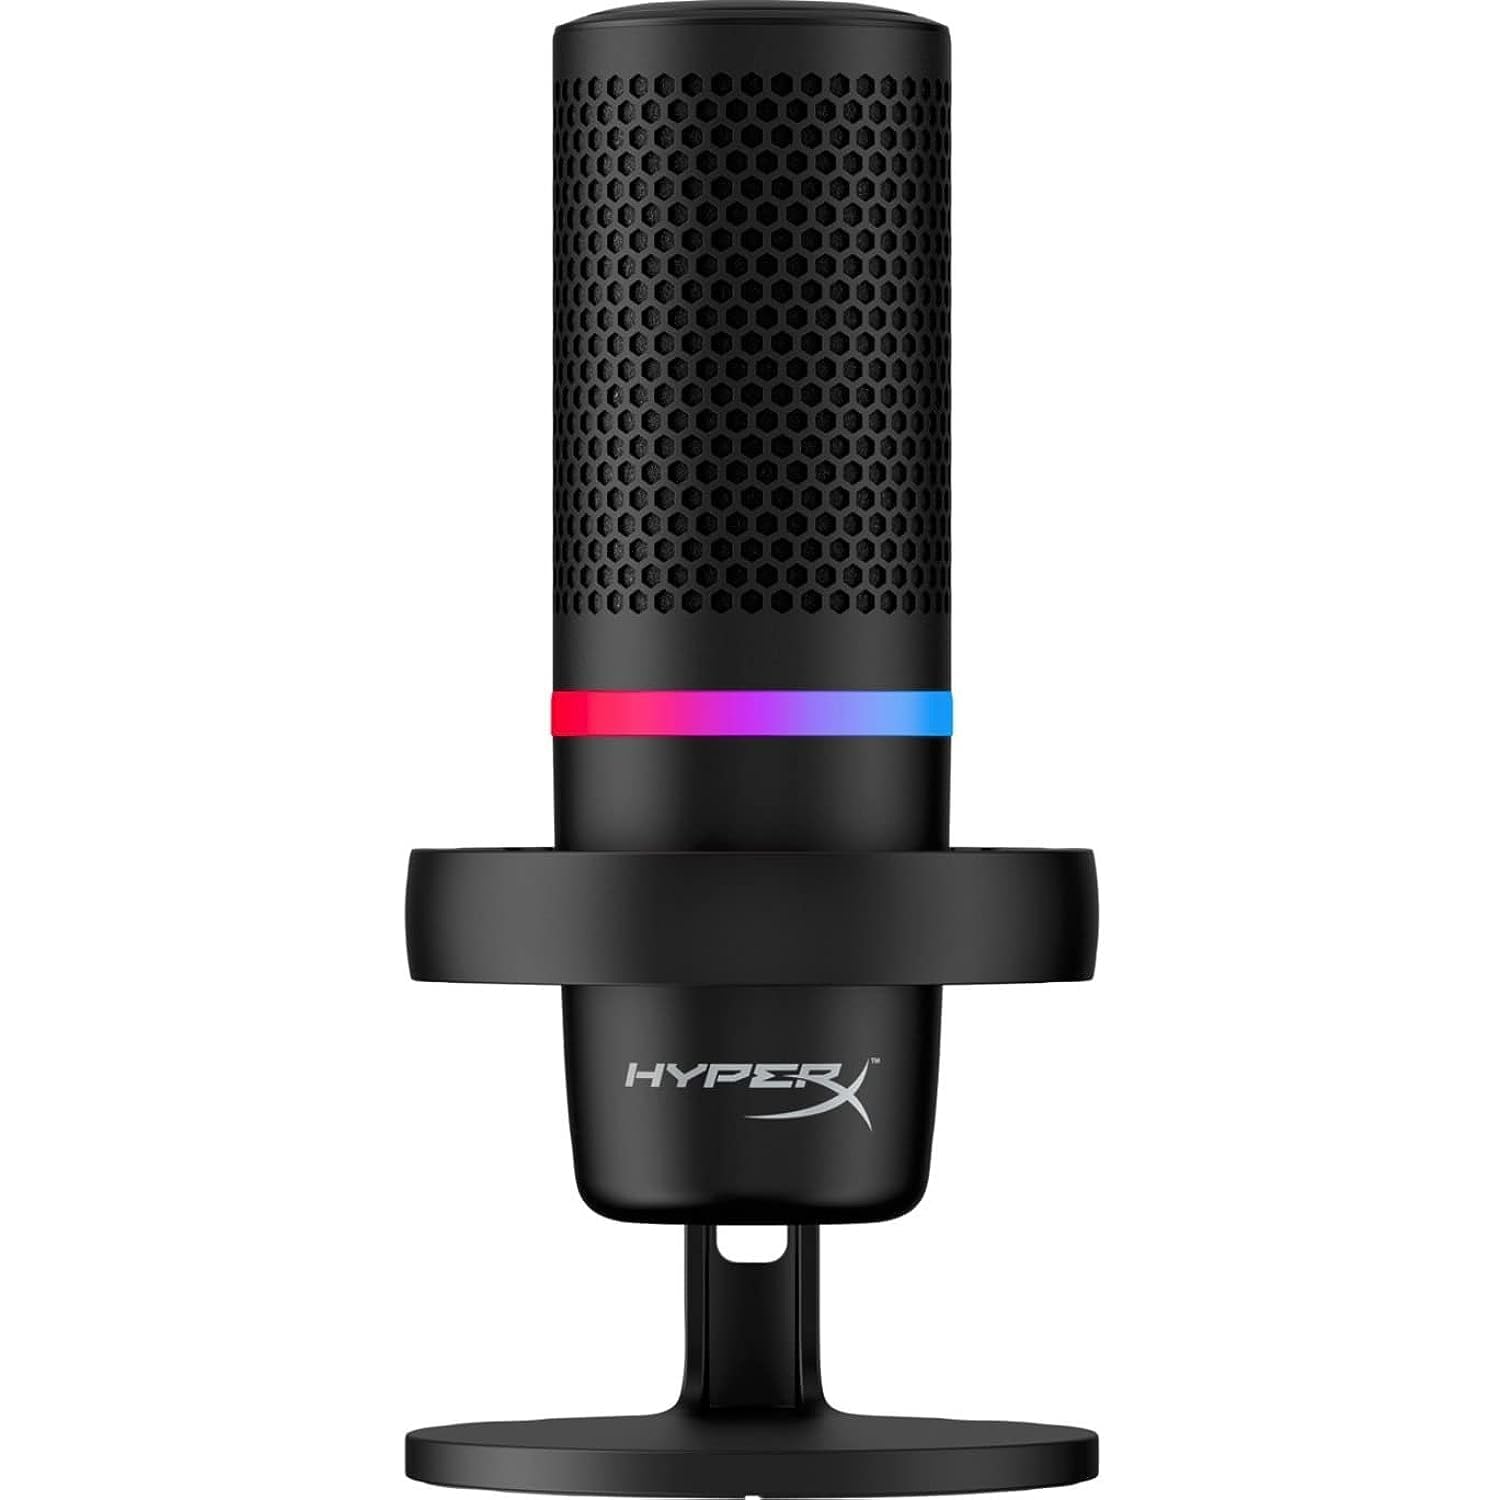 HyperX DuoCast – RGB USB Condenser Microphon, Low-profile Shock Mount, Cardioid, Omnidirectional, Pop Filter, Gain Control, Gaming, Streaming $49.99 at Amazon